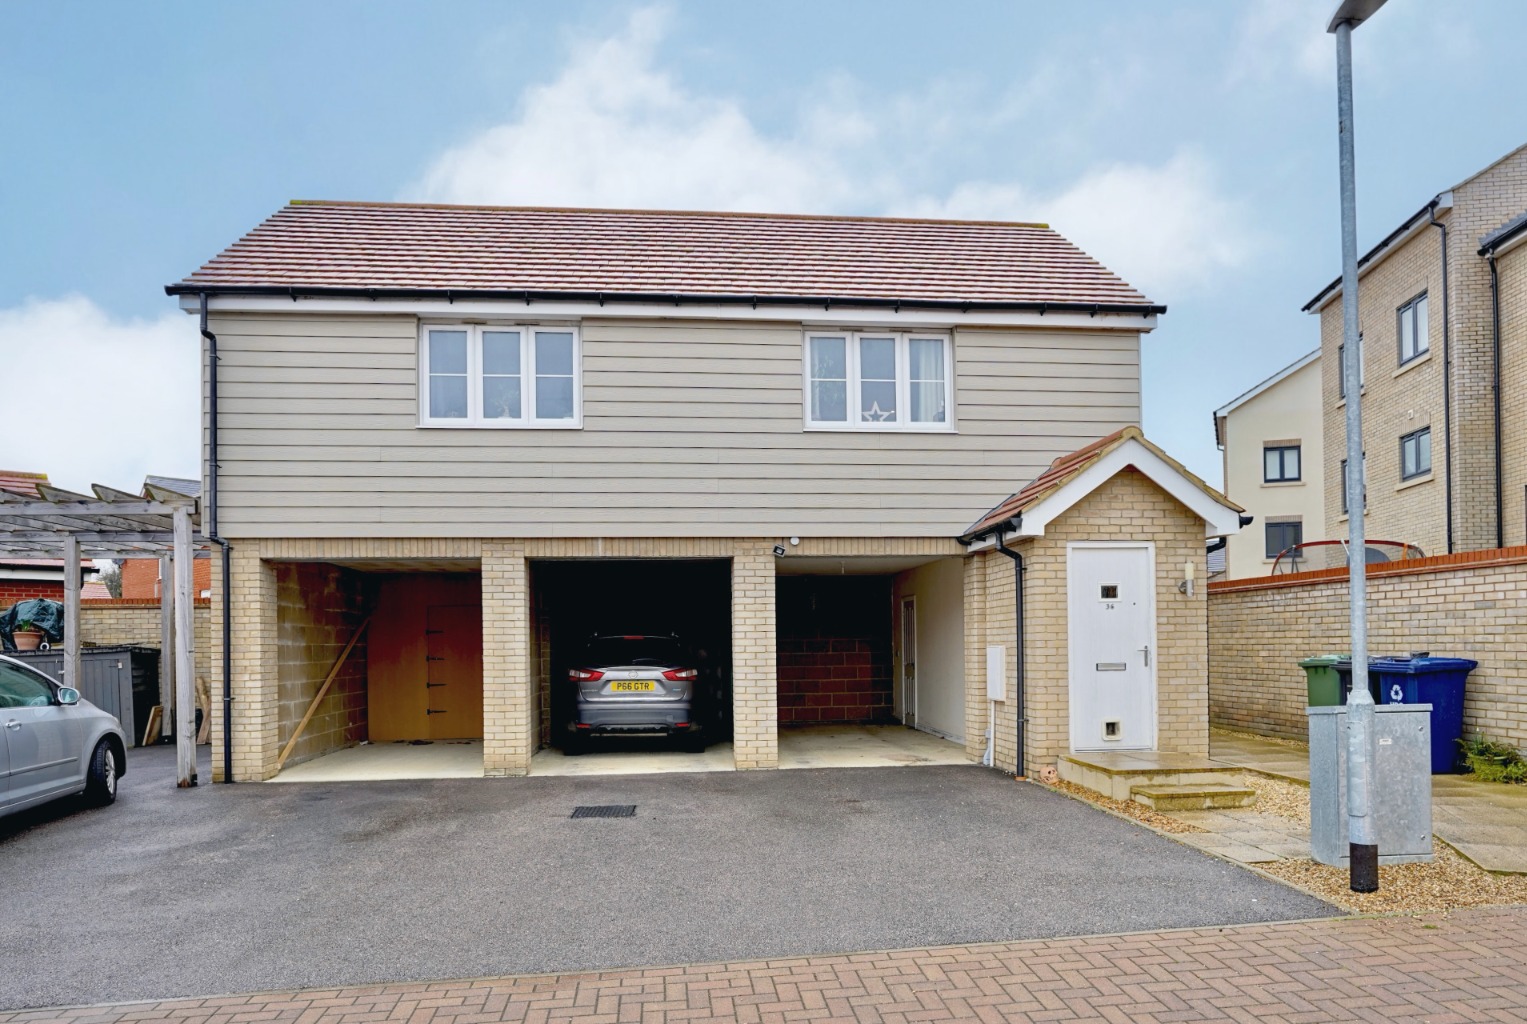 2 bed  for sale in Gorse Crescent, St. Neots, PE19